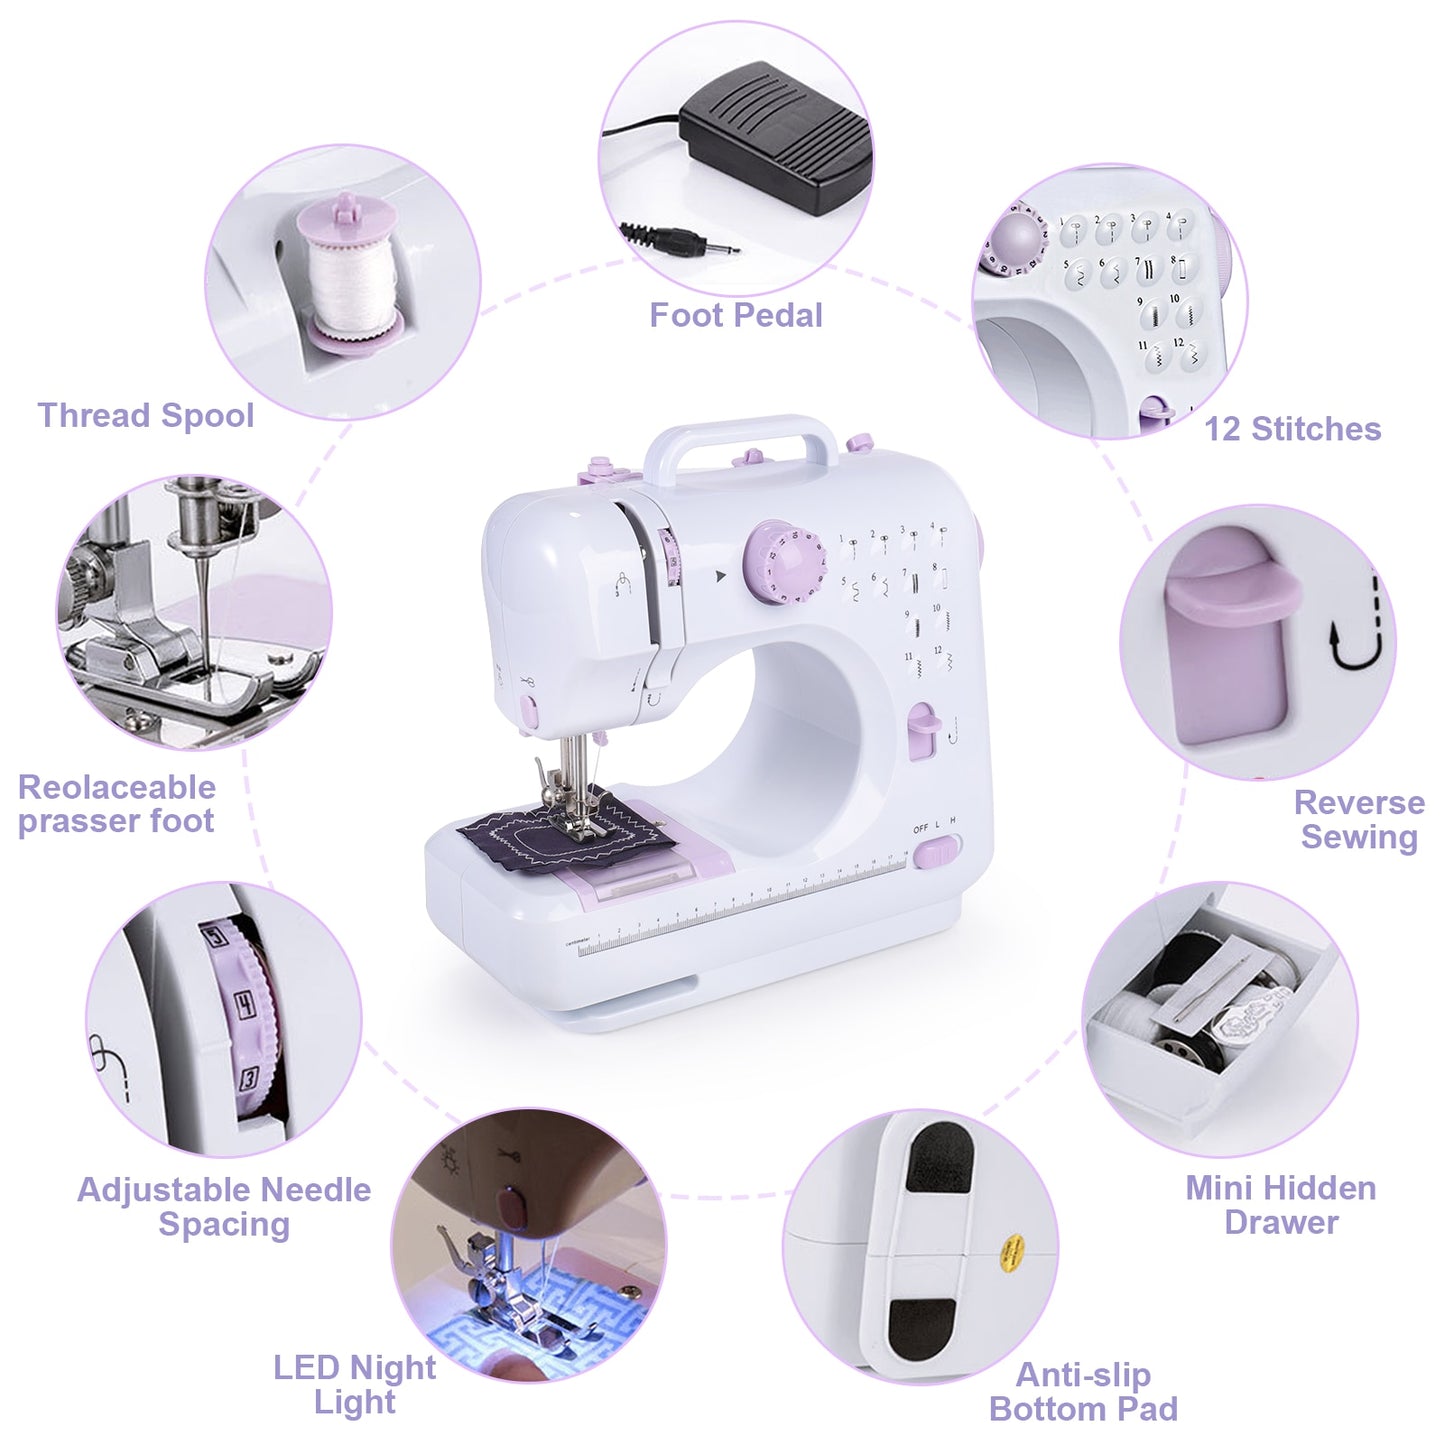 Genuine Sewing Machine 505A Home Mini Sewing Machine Portable Household Knitting Multifunction Electric Presser Foot